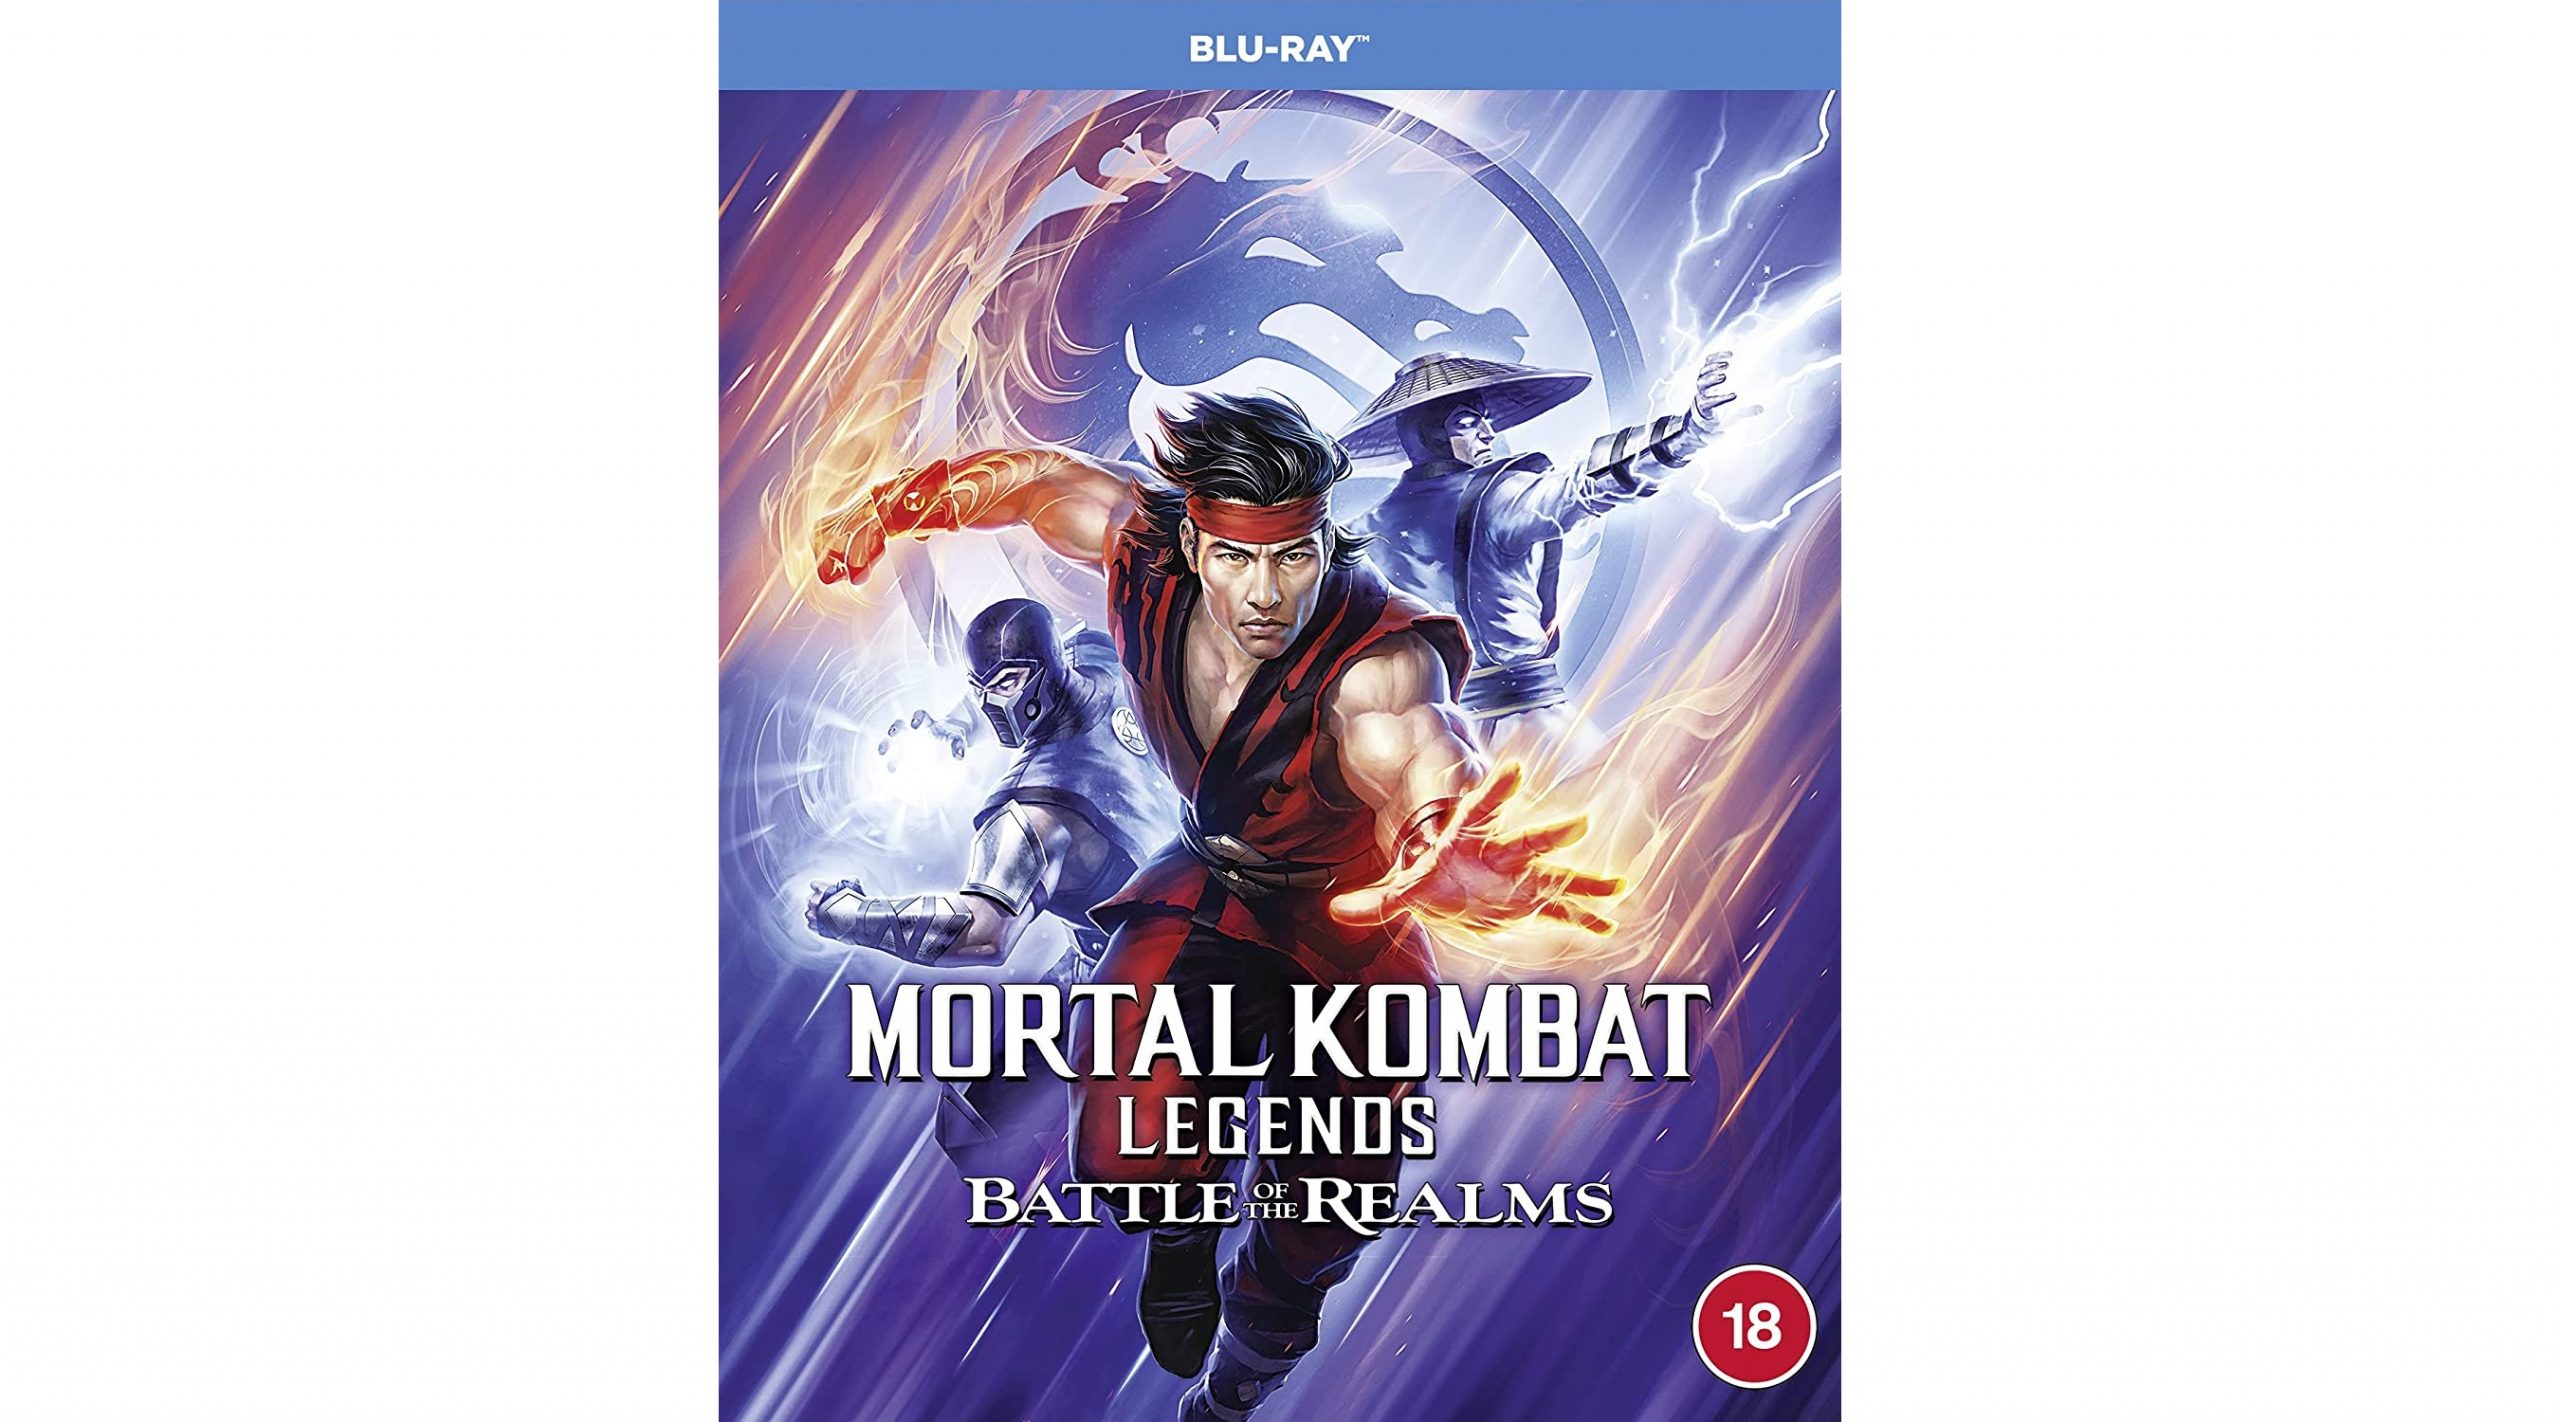 Win Mortal Kombat Legends: Battle Of The Realms On Blu Ray And Mortal Kombat 11 Ultimate On Xbox Series X